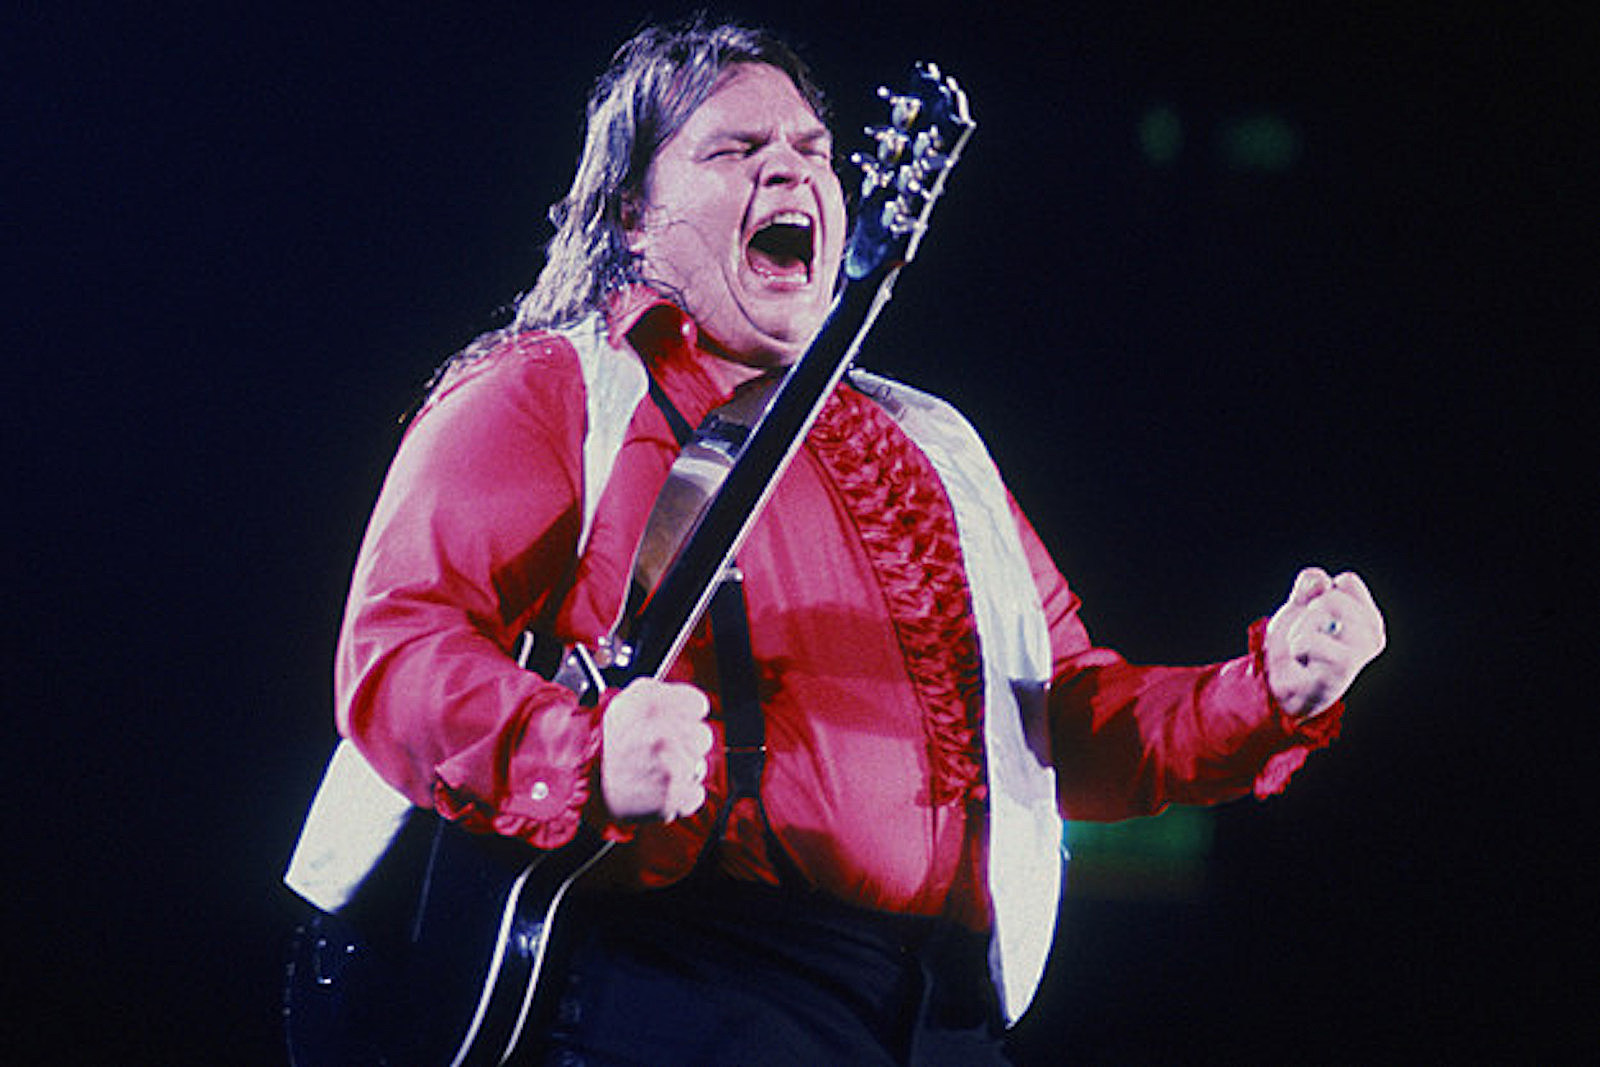 Singer and Actor, Meat Loaf